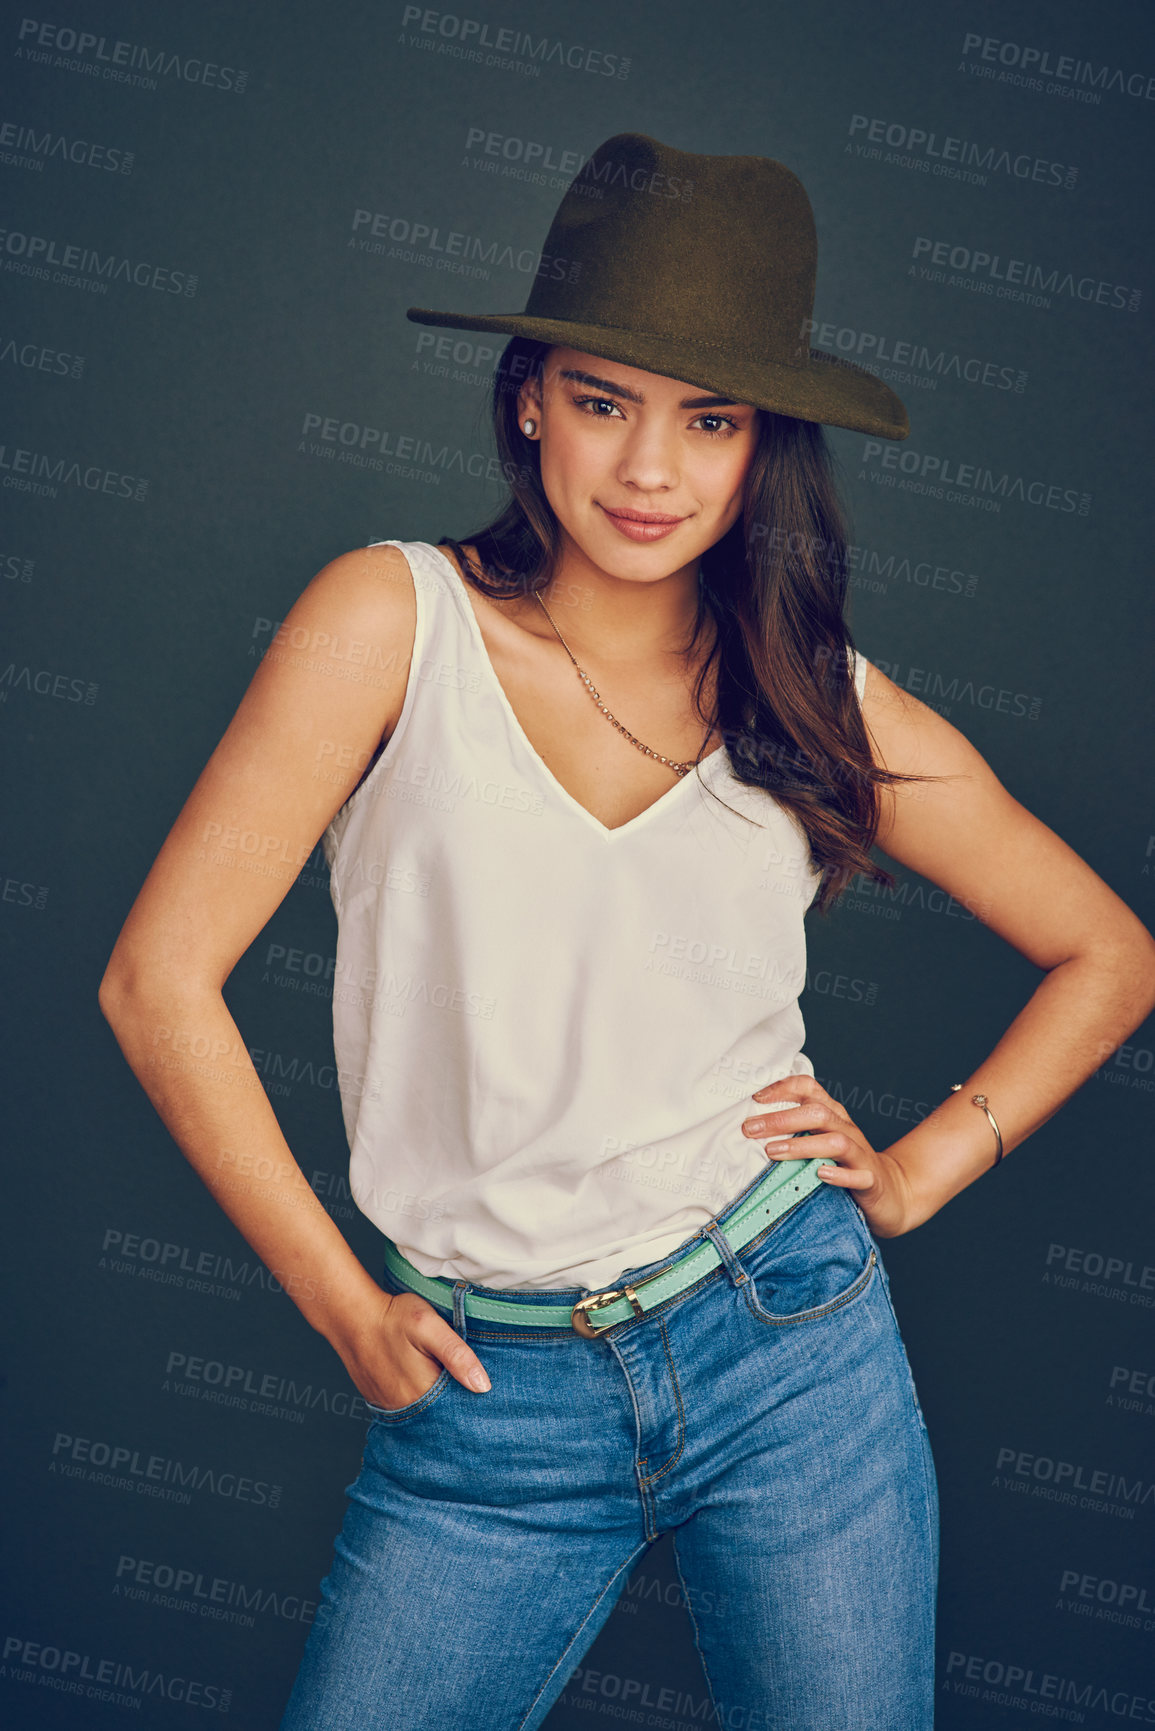 Buy stock photo Studio shot of an attractive young woman wearing a hat and posing while standing against a dark background